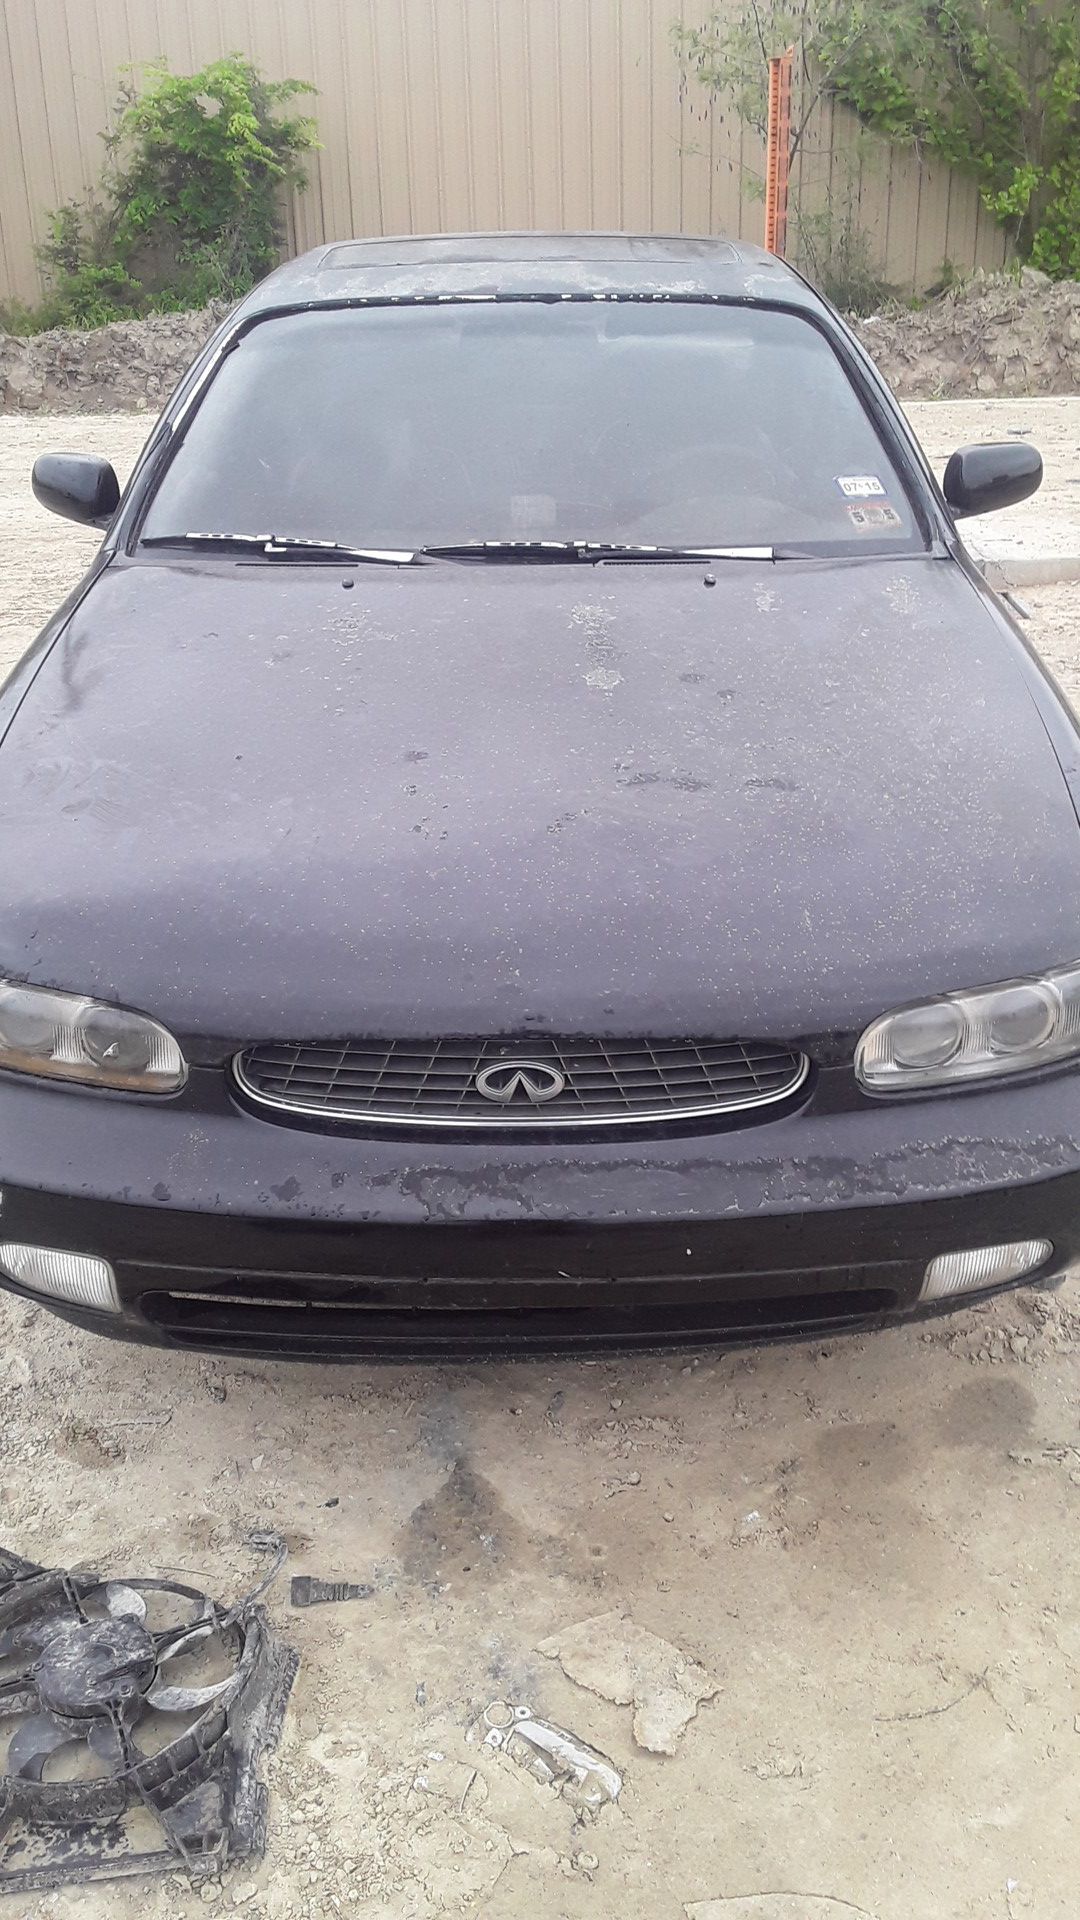 1995 Infiniti J30 for parts